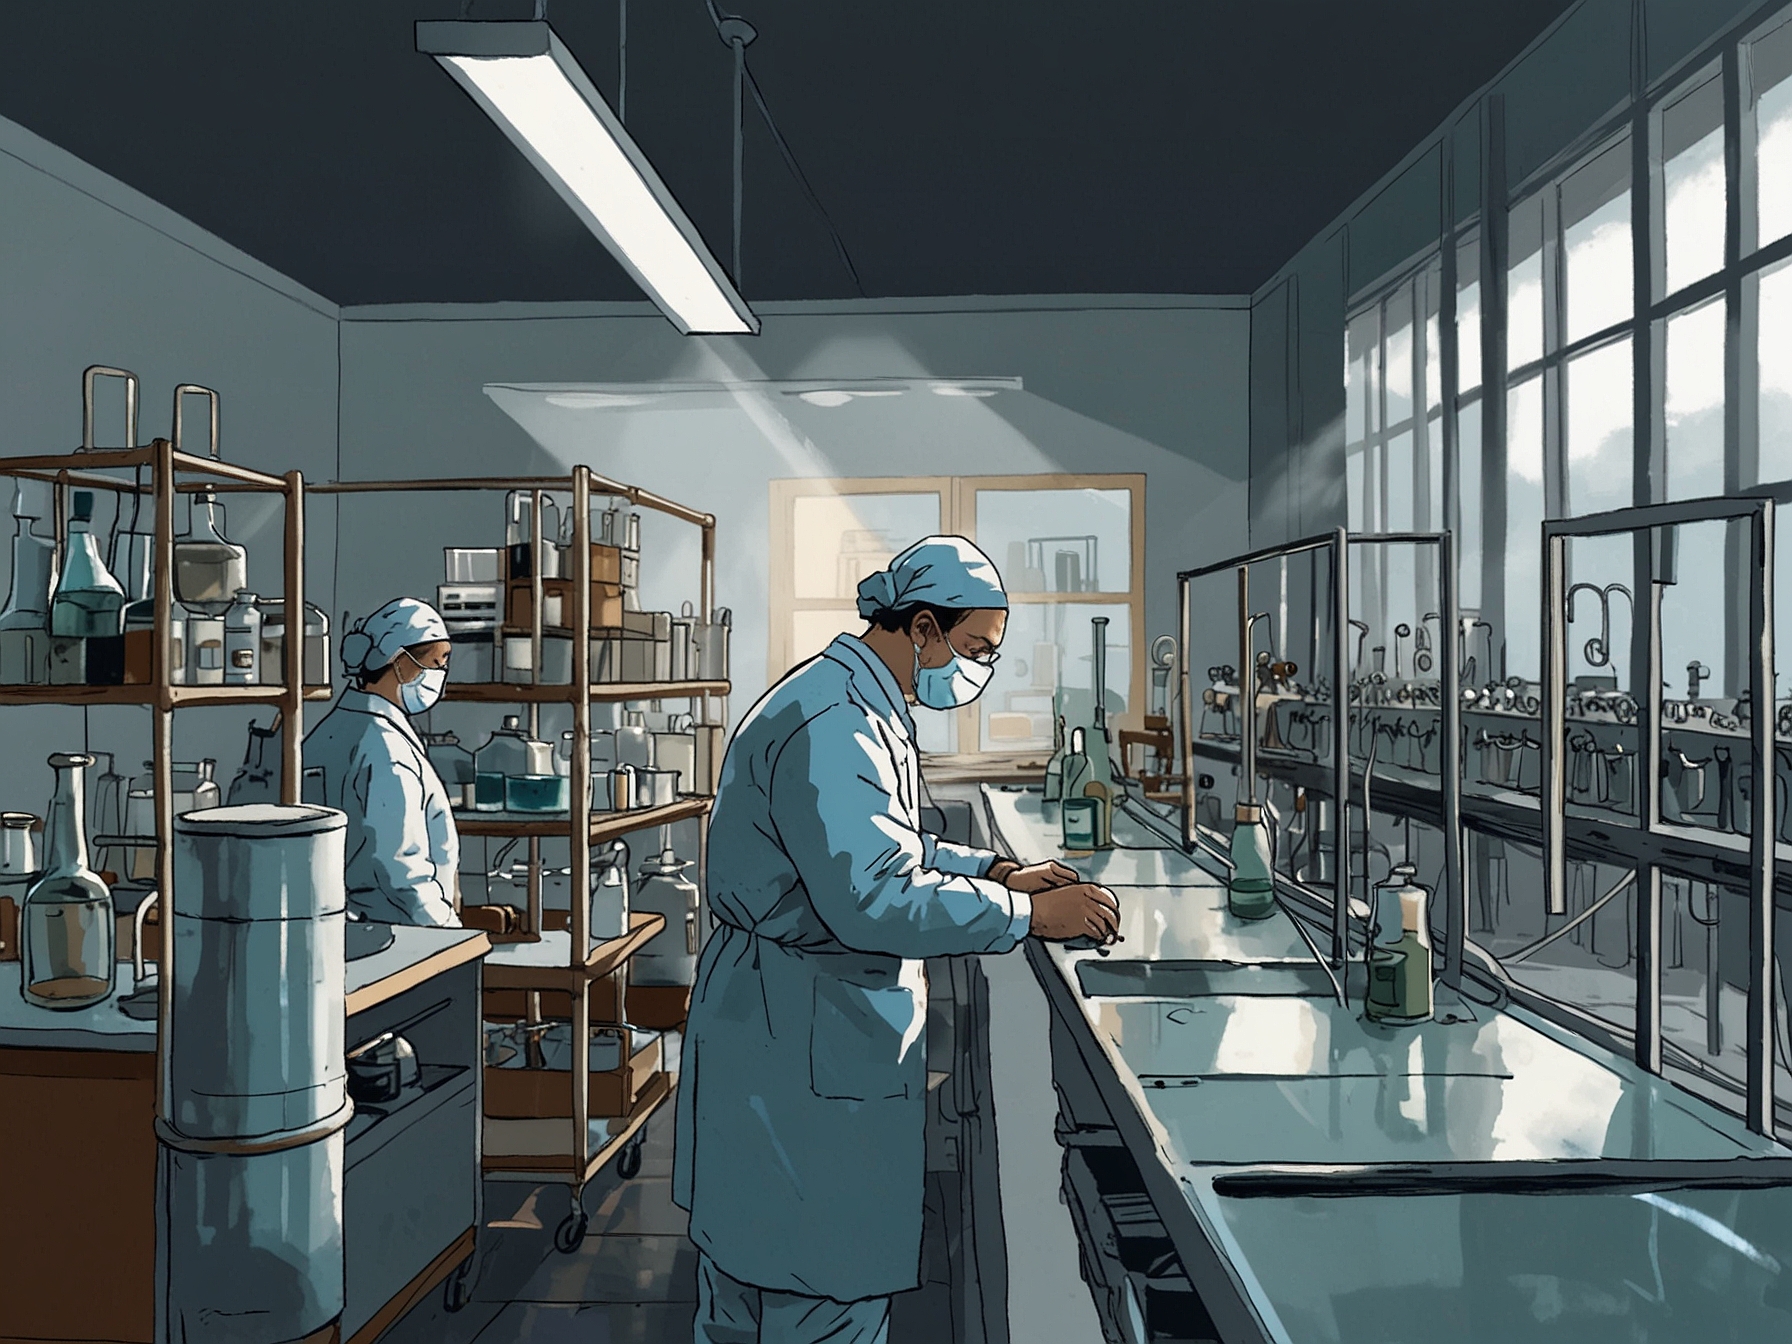 A laboratory setting with scientists conducting research on milk pasteurization. They are using specialized equipment to test the inactivation of the bird flu virus in milk.